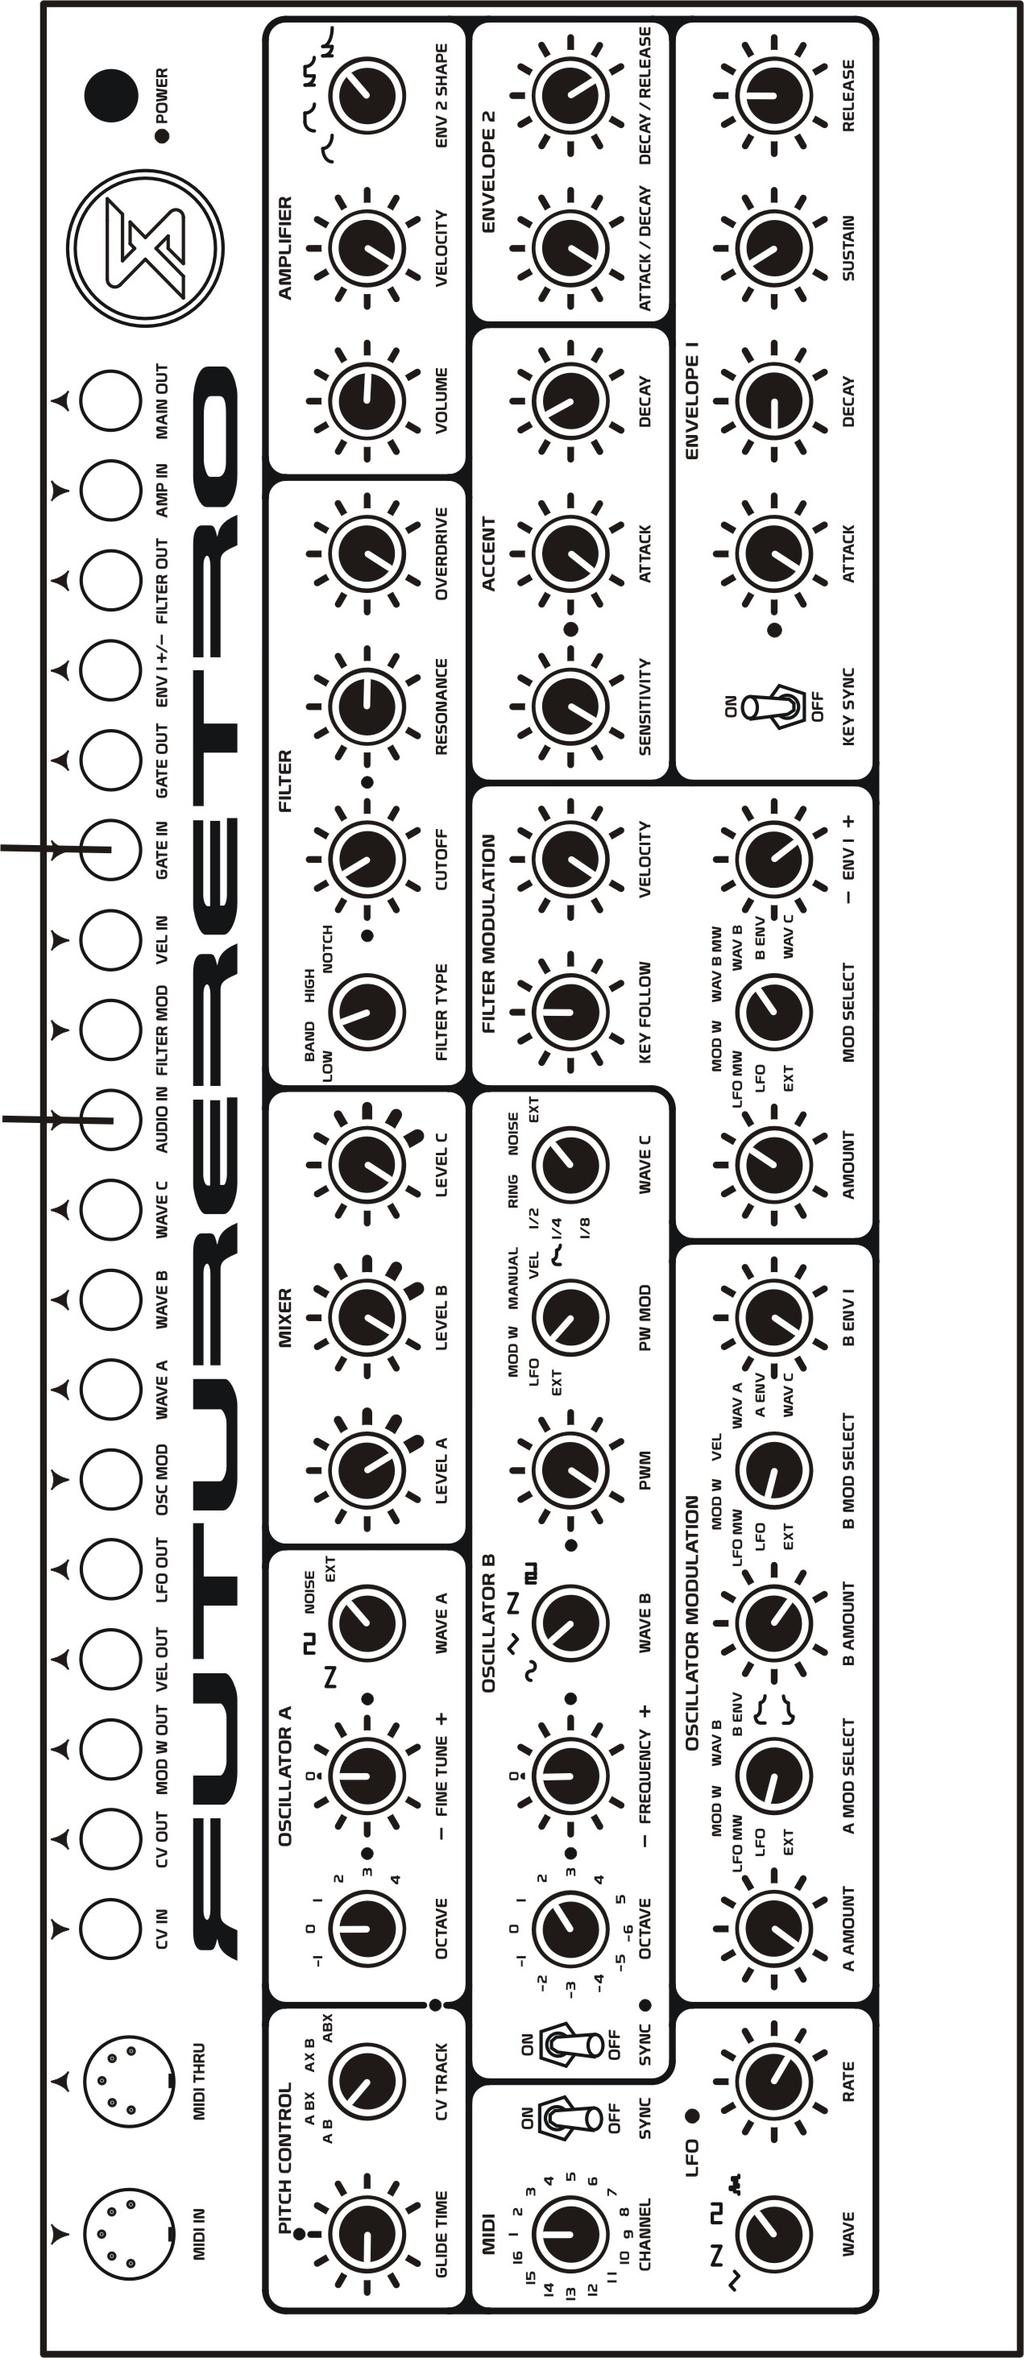 54 STRANGE BEATS Here s one way to mangle your beats. If your drum machine has stereo outputs, route one channel to the AUDIO IN jack, and the other to the GATE IN jack.